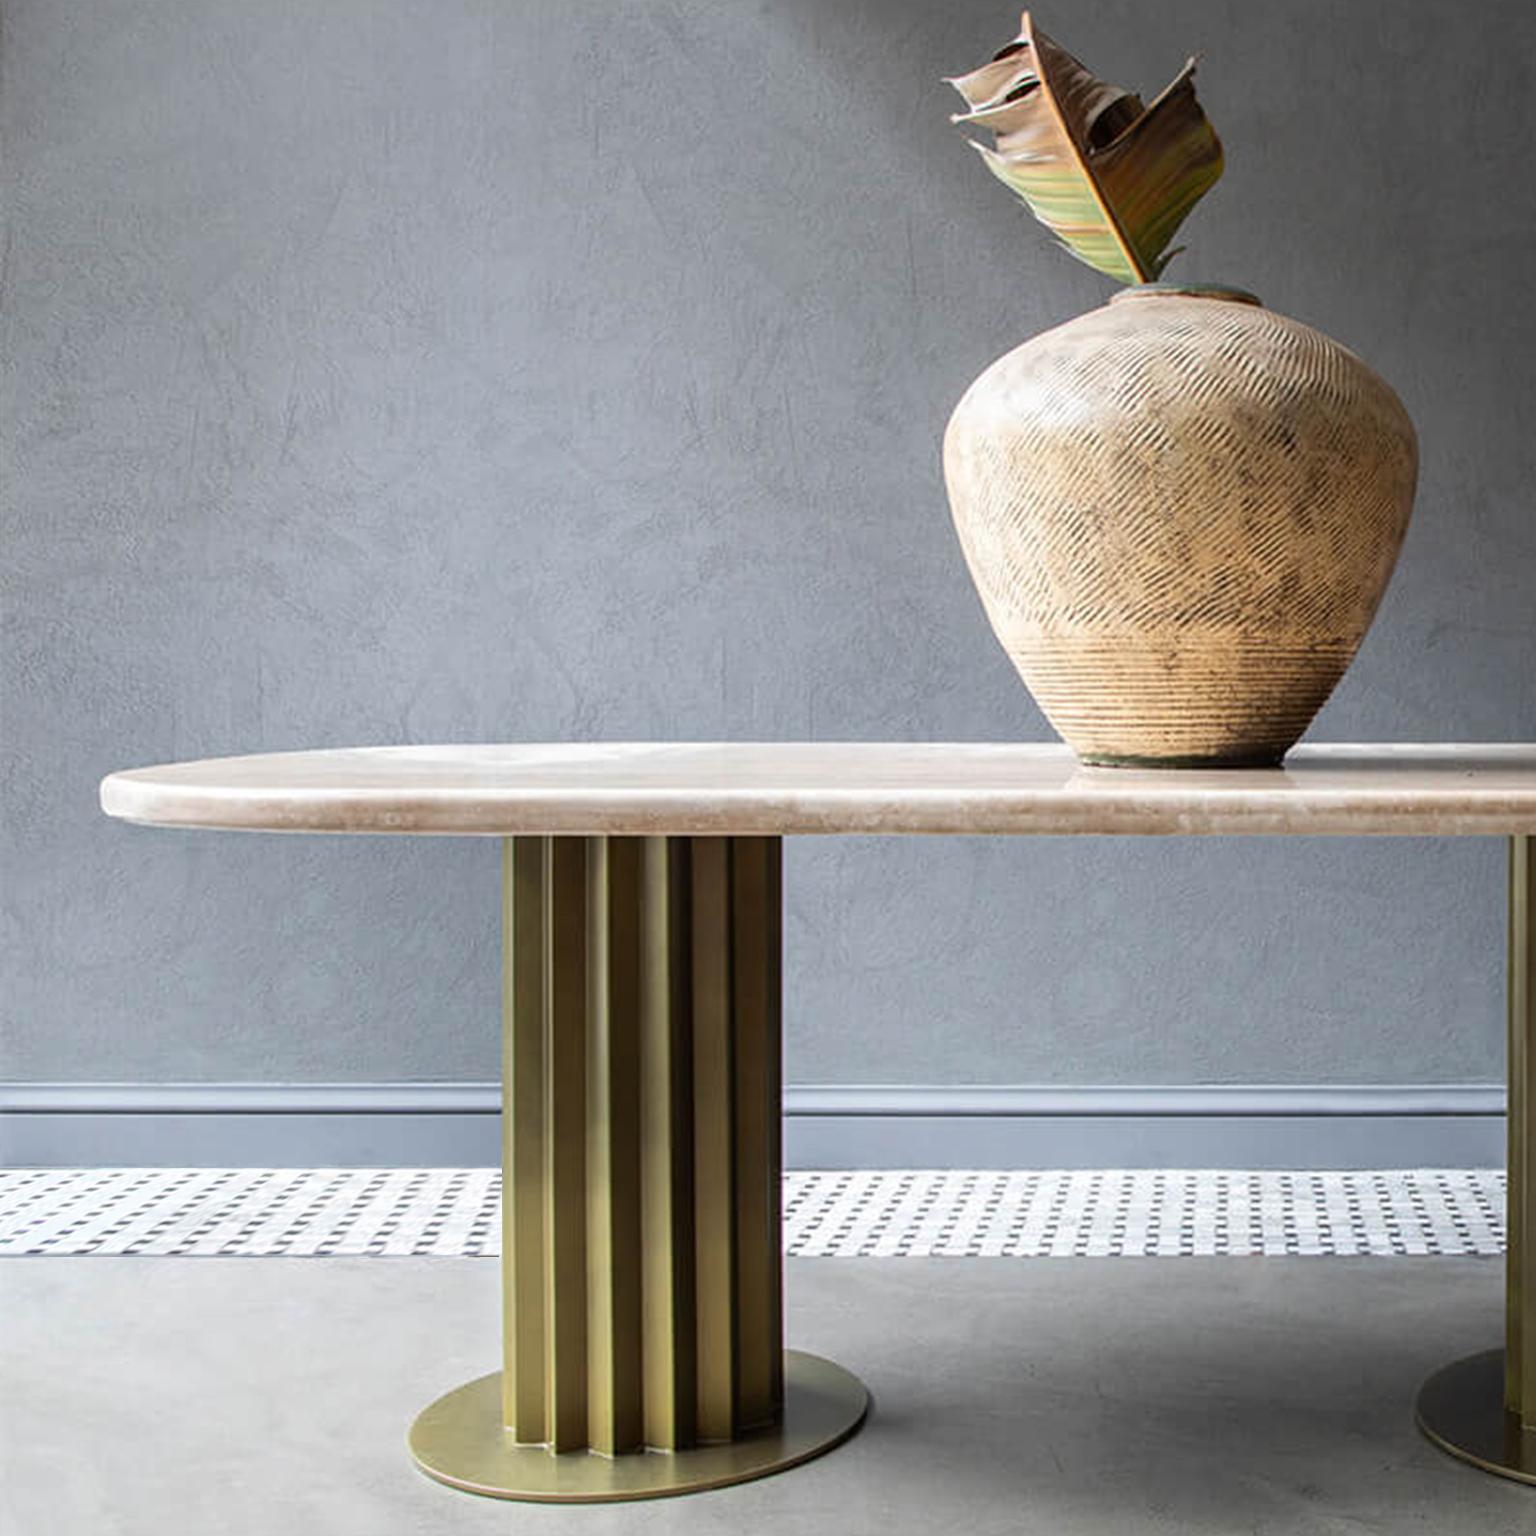 Recalled brass table by Lagu.
Designed by Ufuk Ceylan.
Dimensions: W 220 x D 100 x H 74 cm.
Materials: Marble, Brass.

Recalled table brings a historical aesthetic to your home.

MARBLE USE AND CARE
Clean surfaces with a slightly damp